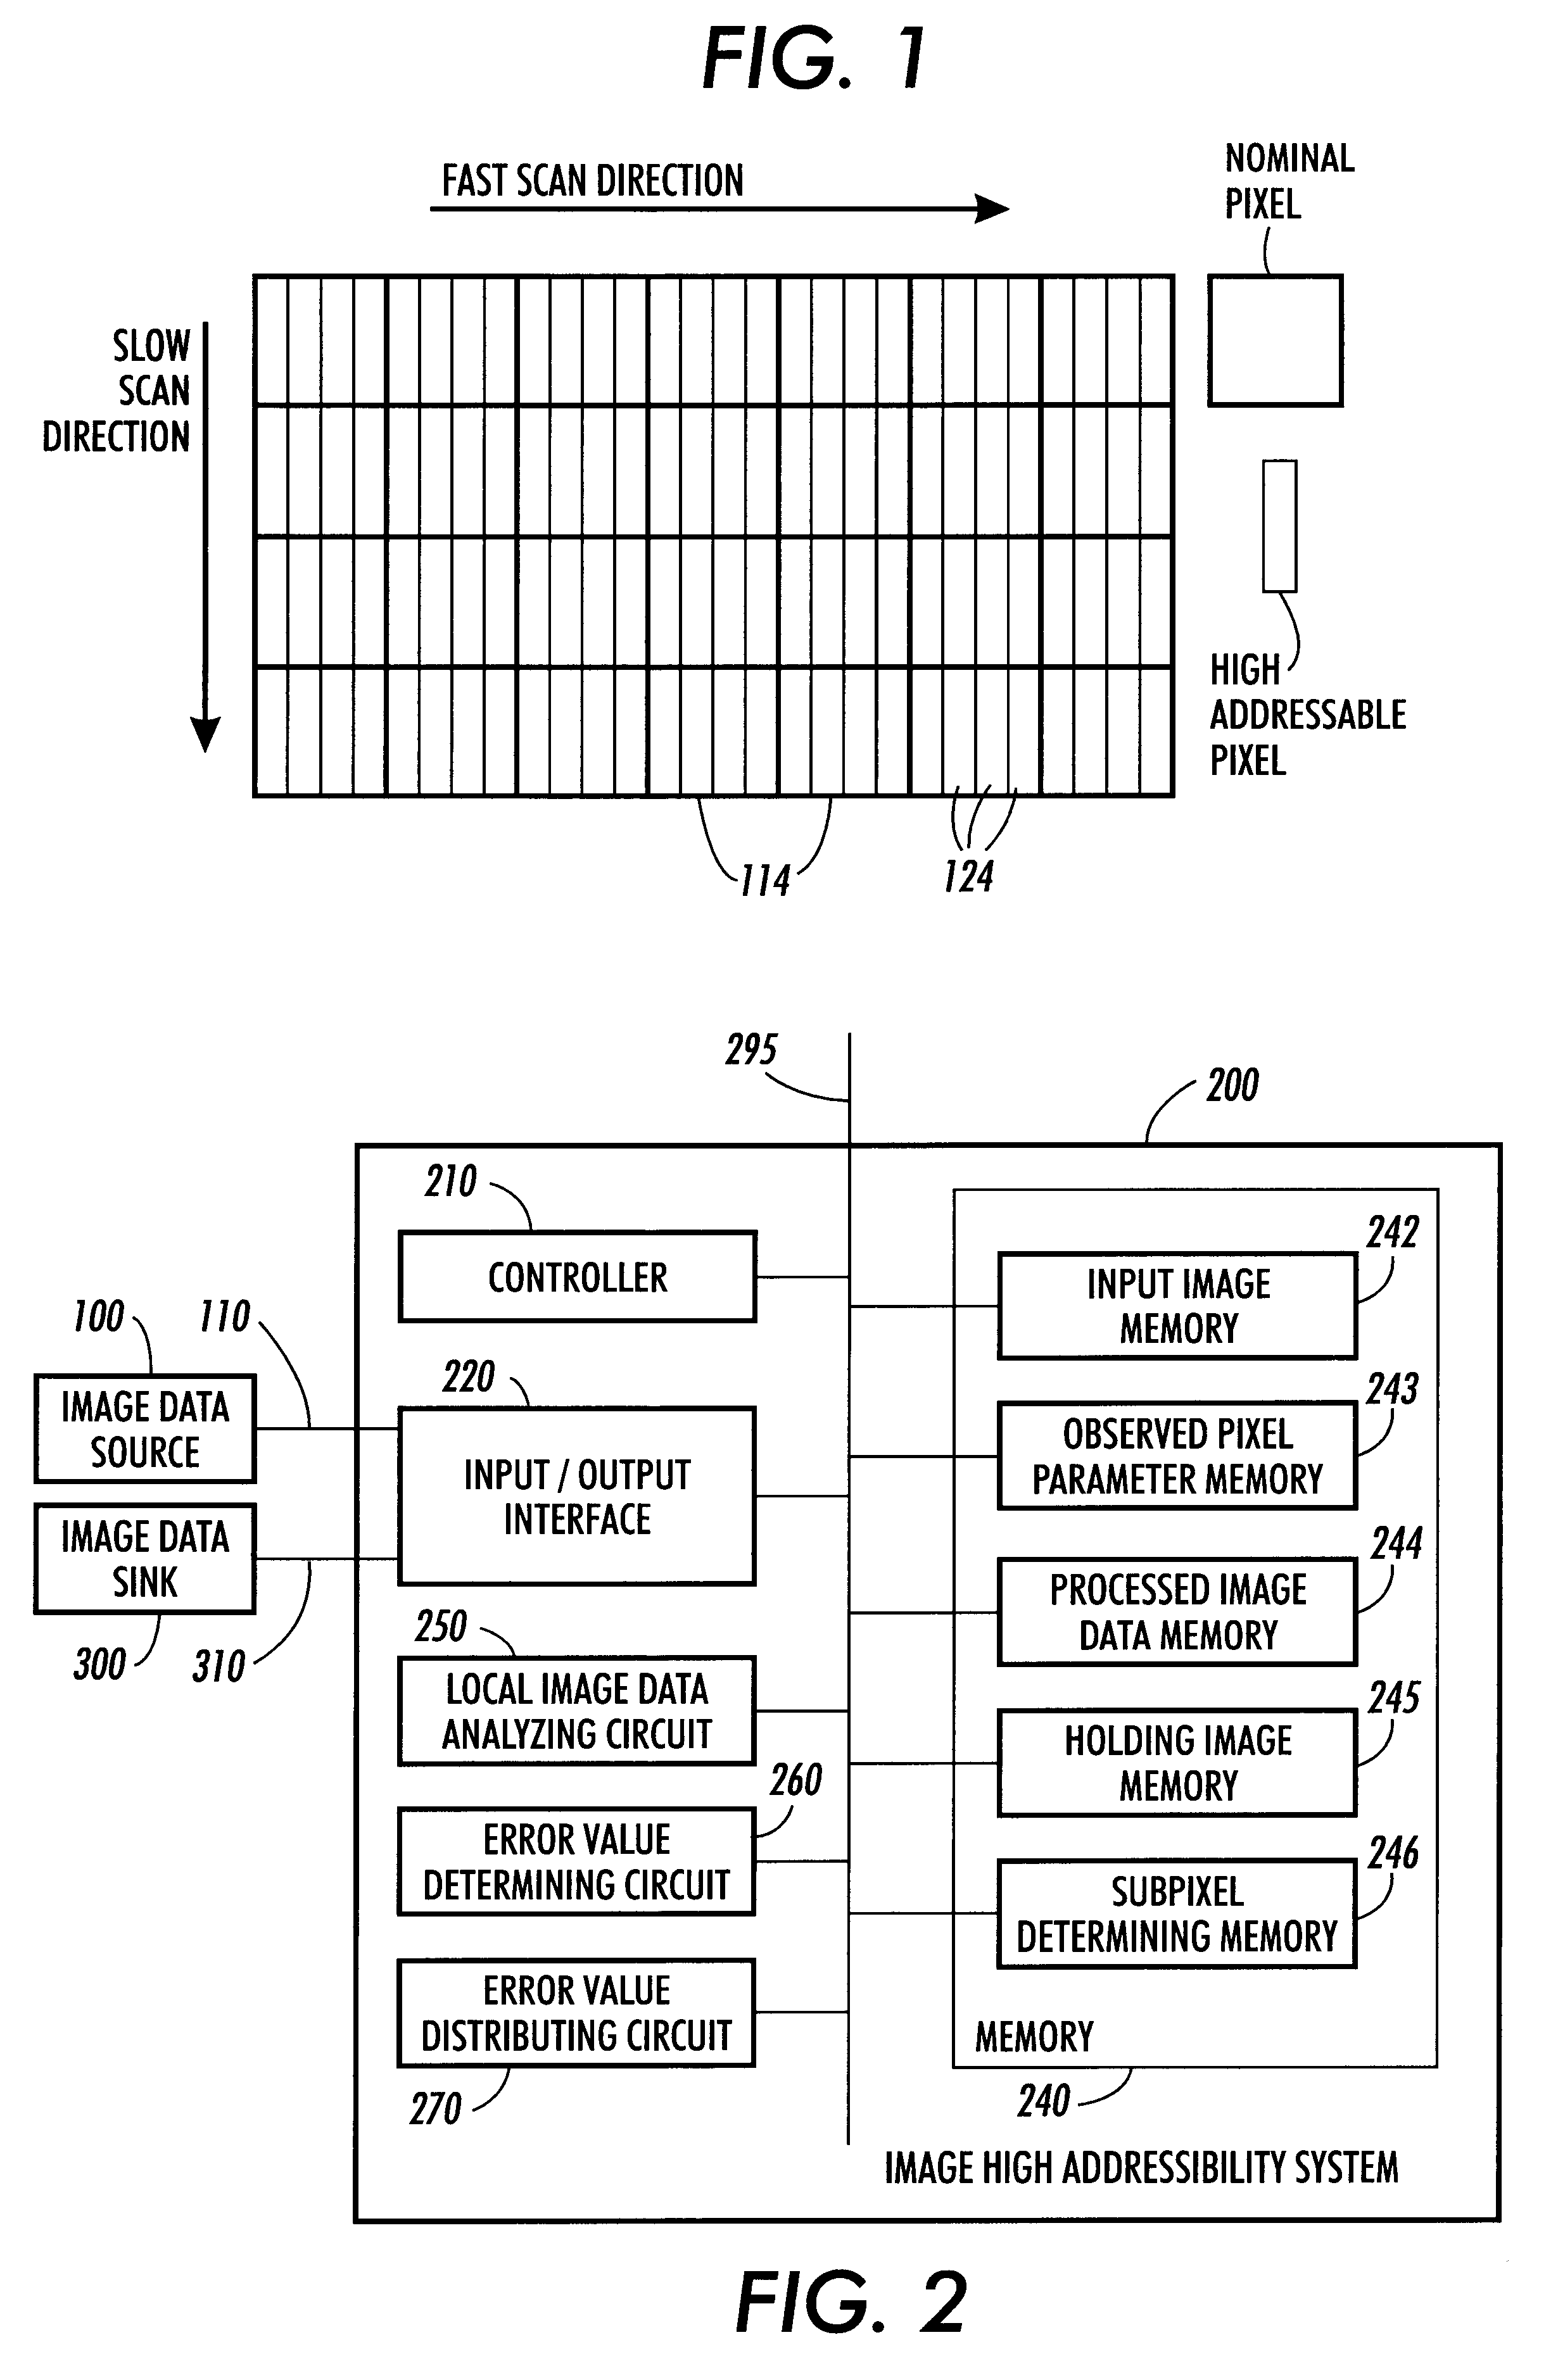 Systems and methods for generating high addressability images